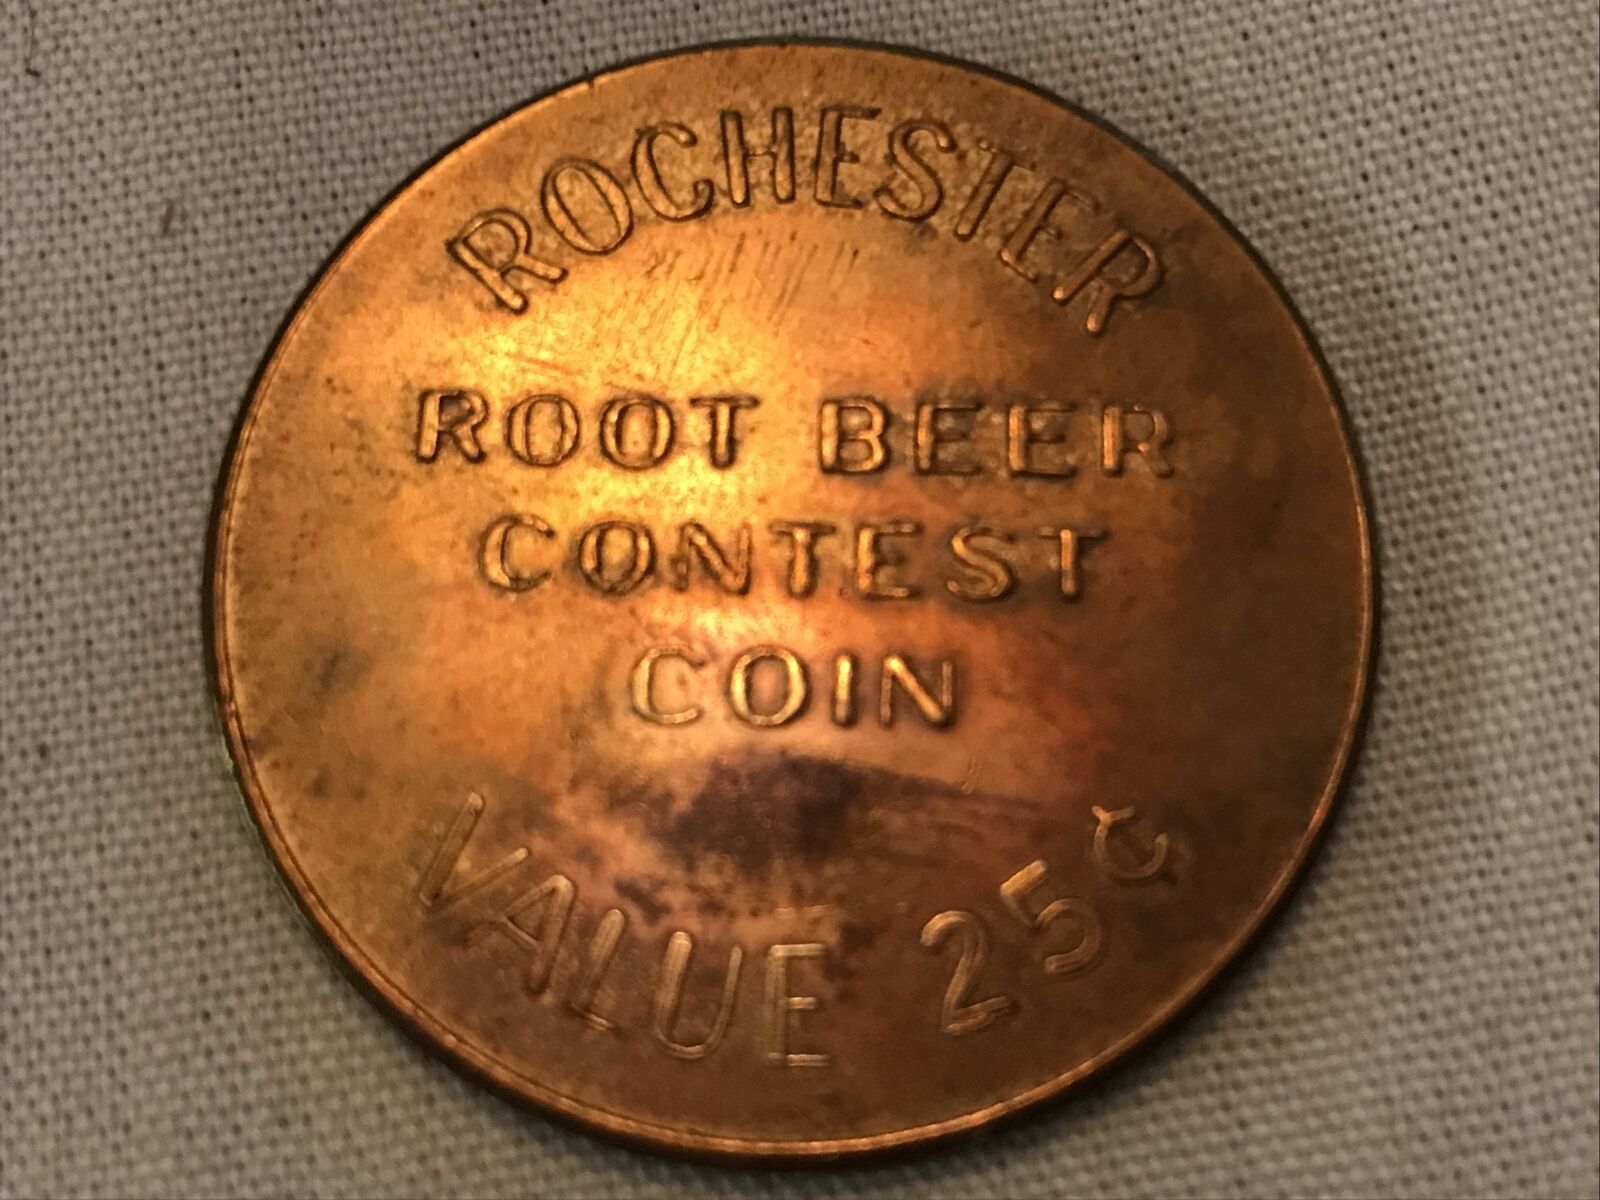 ROCHESTER ROOT BEER VINTAGE CONTEST COIN, J. HUNGERFORD SMITH